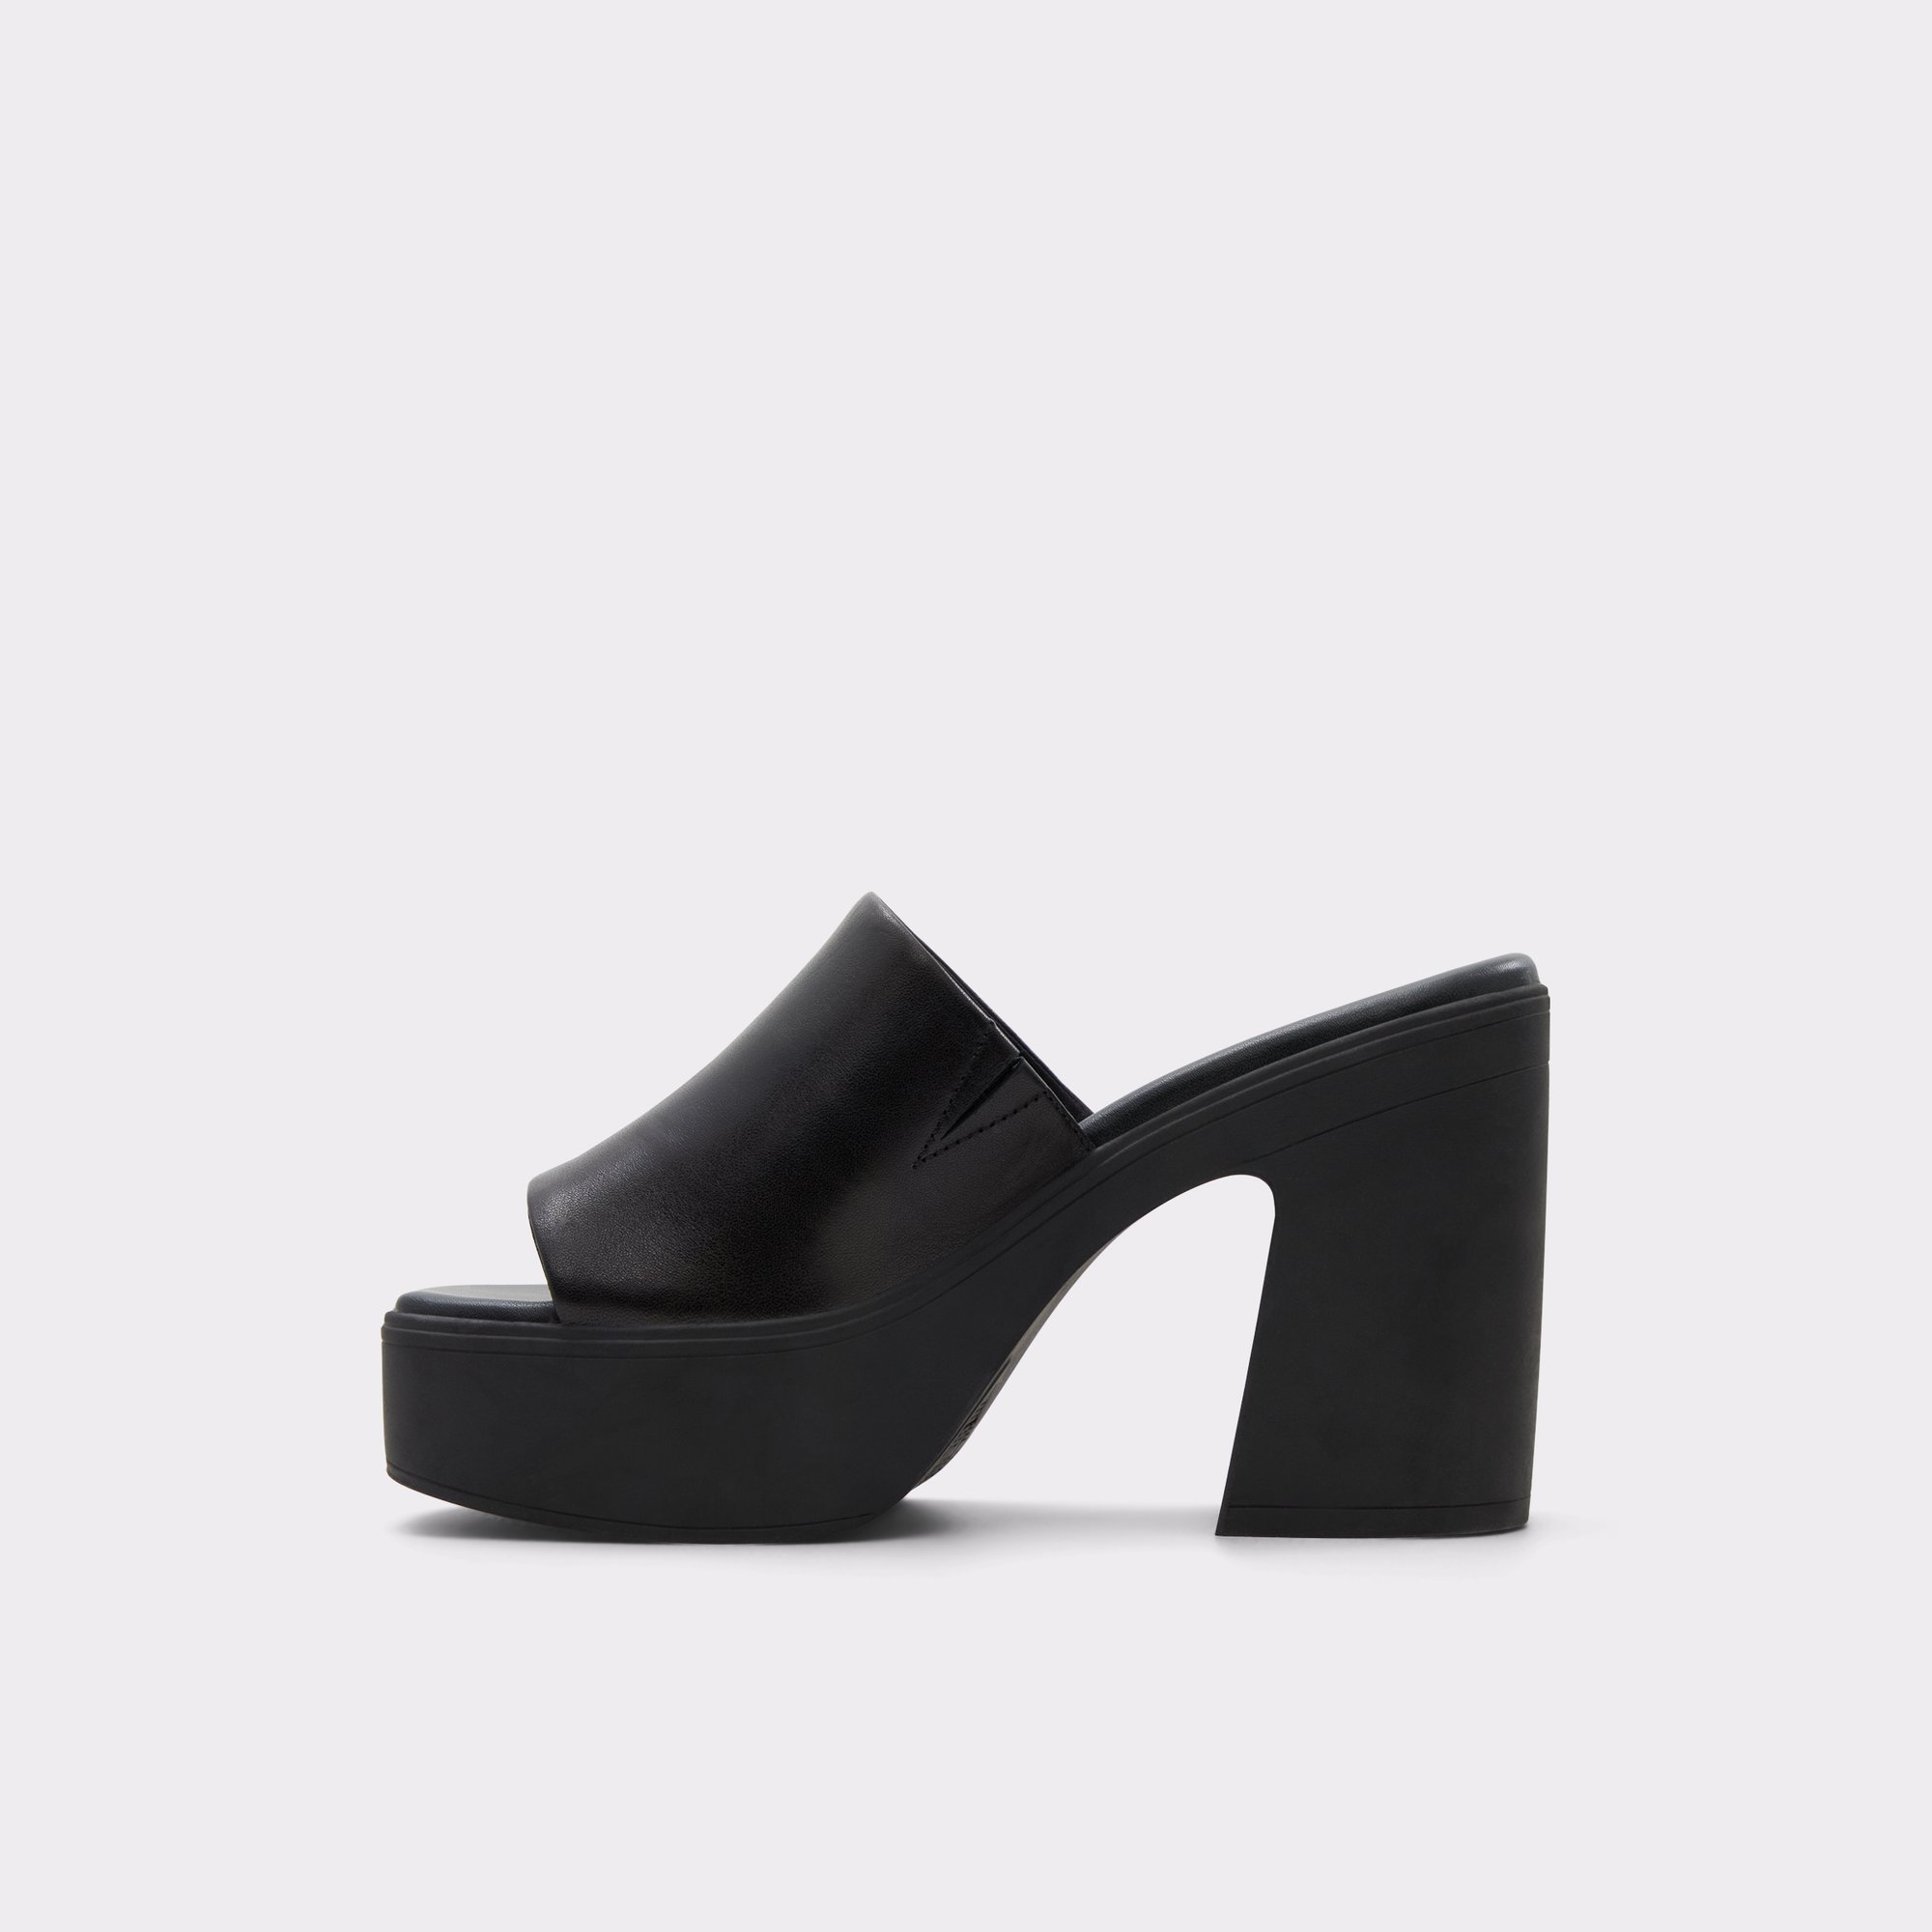 Maysee Other Black Leather Smooth Women's Mule slides | ALDO Canada